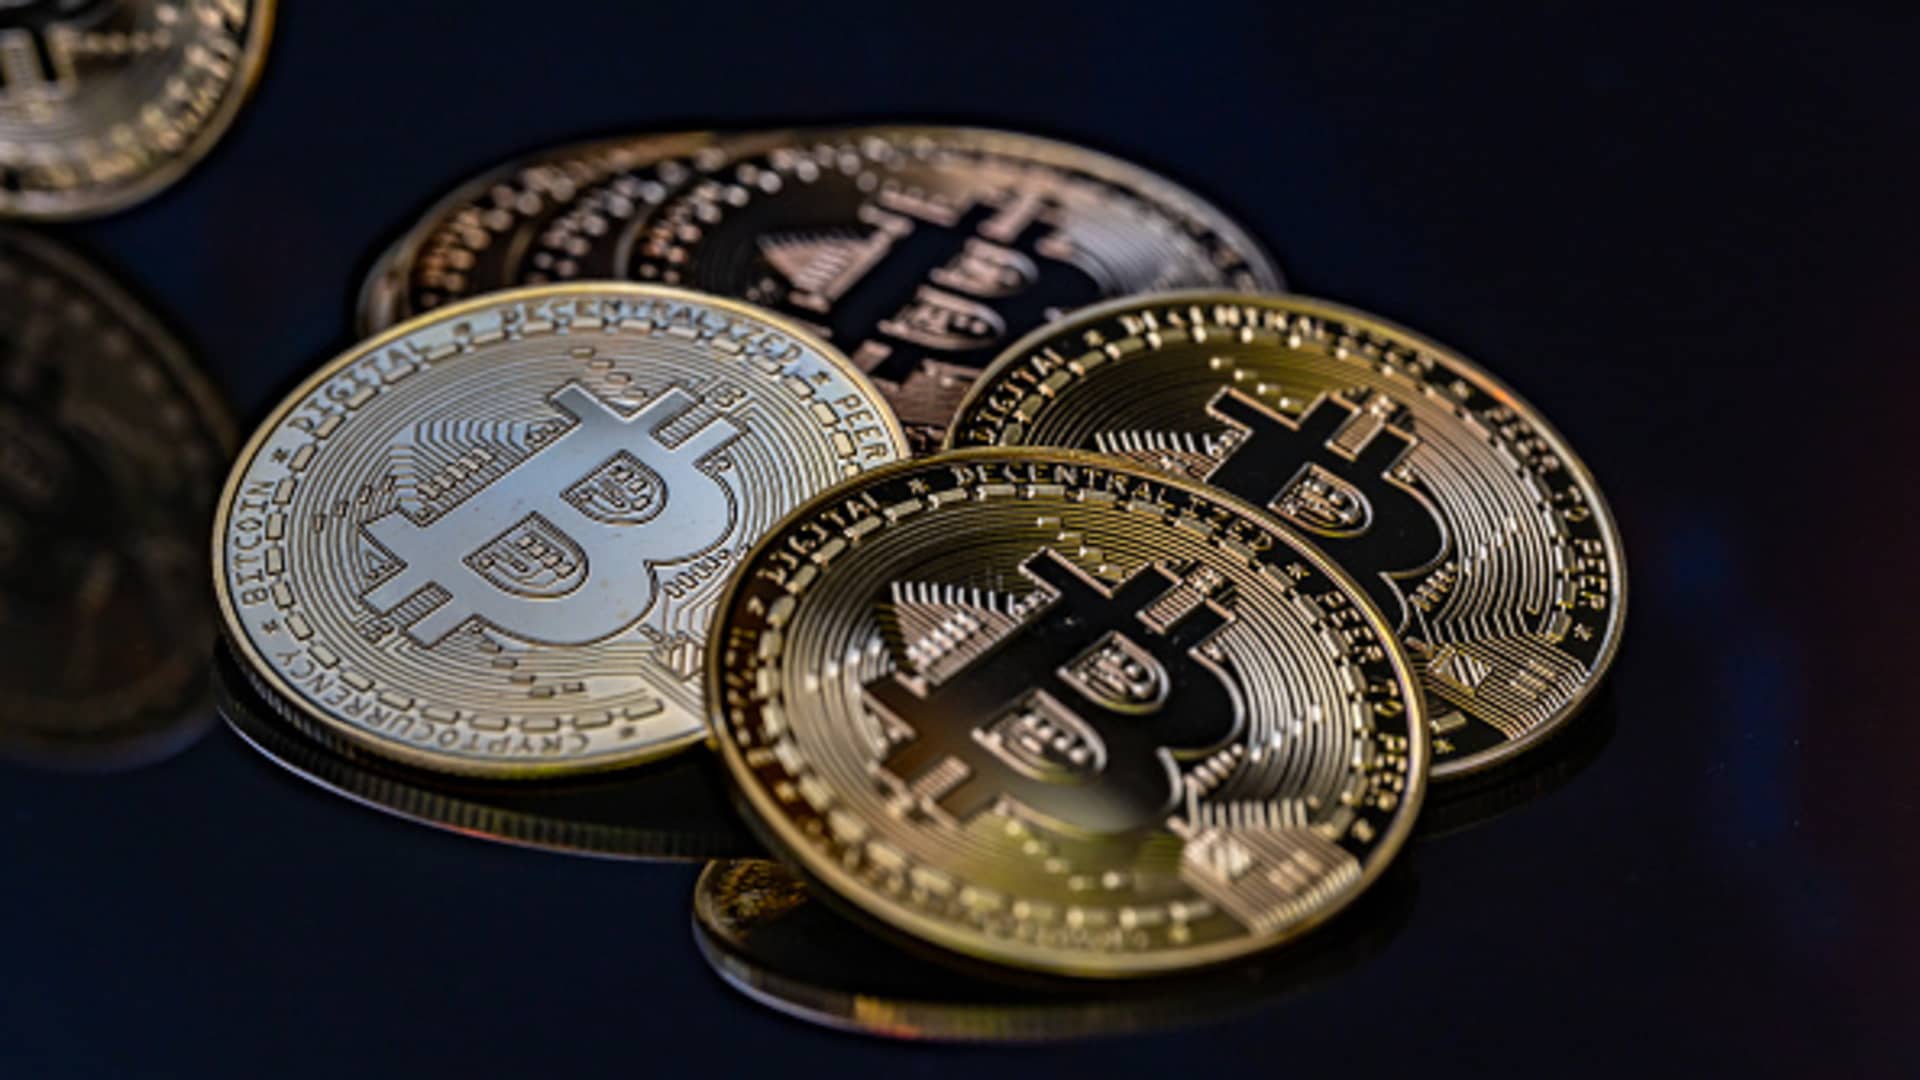 Feds announce seizure of $3.36 billion in bitcoin stolen a decade ago from illegal Silk Road marketplace—the second-largest crypto recovery